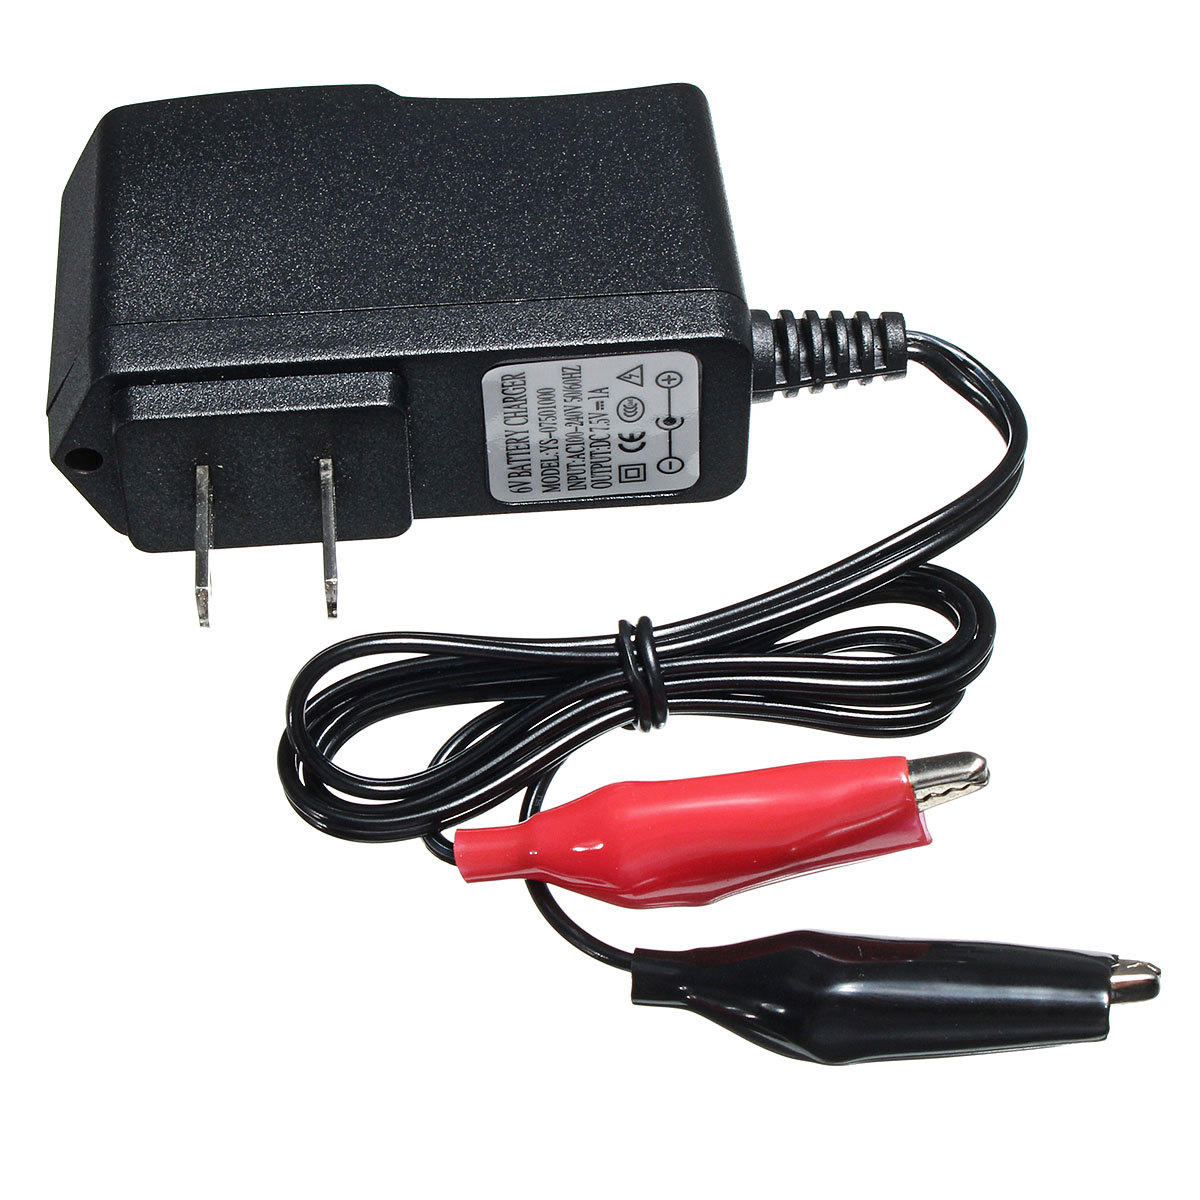 

6V 1A 7Ah Sealed Lead Acid Rechargeable Car Battery Charger Adapter Output 7.5V